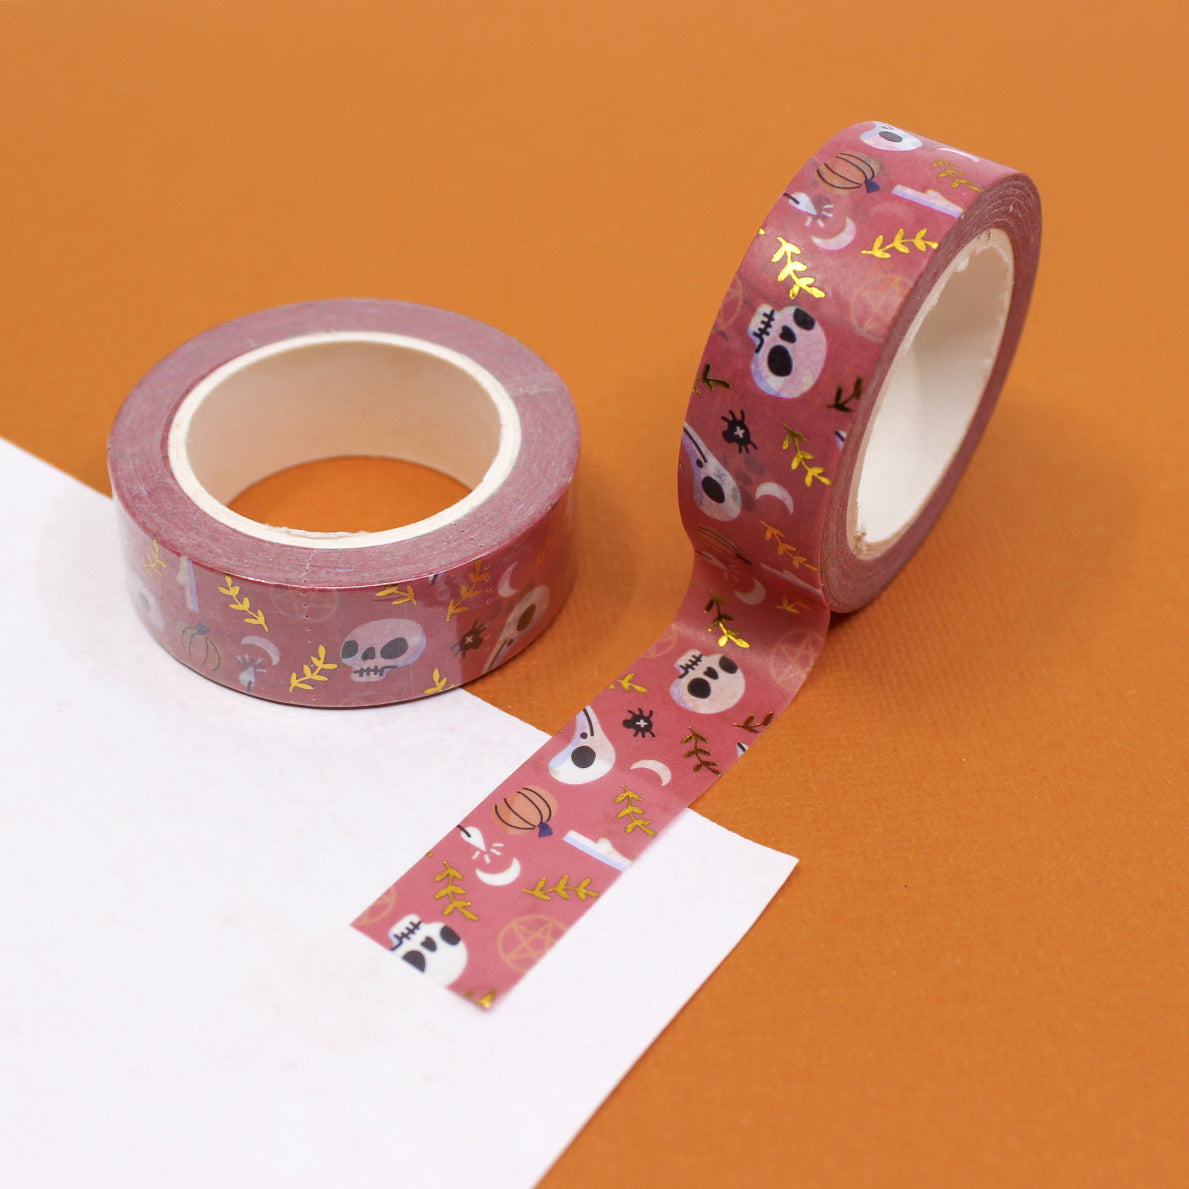 Brighten up Halloween with our Bright Pink Halloween Objects Washi Tape, adorned with a variety of playful Halloween-themed illustrations. Ideal for adding a colorful and festive touch to your projects. This tape is sold at BBB Supplies Craft Shop.